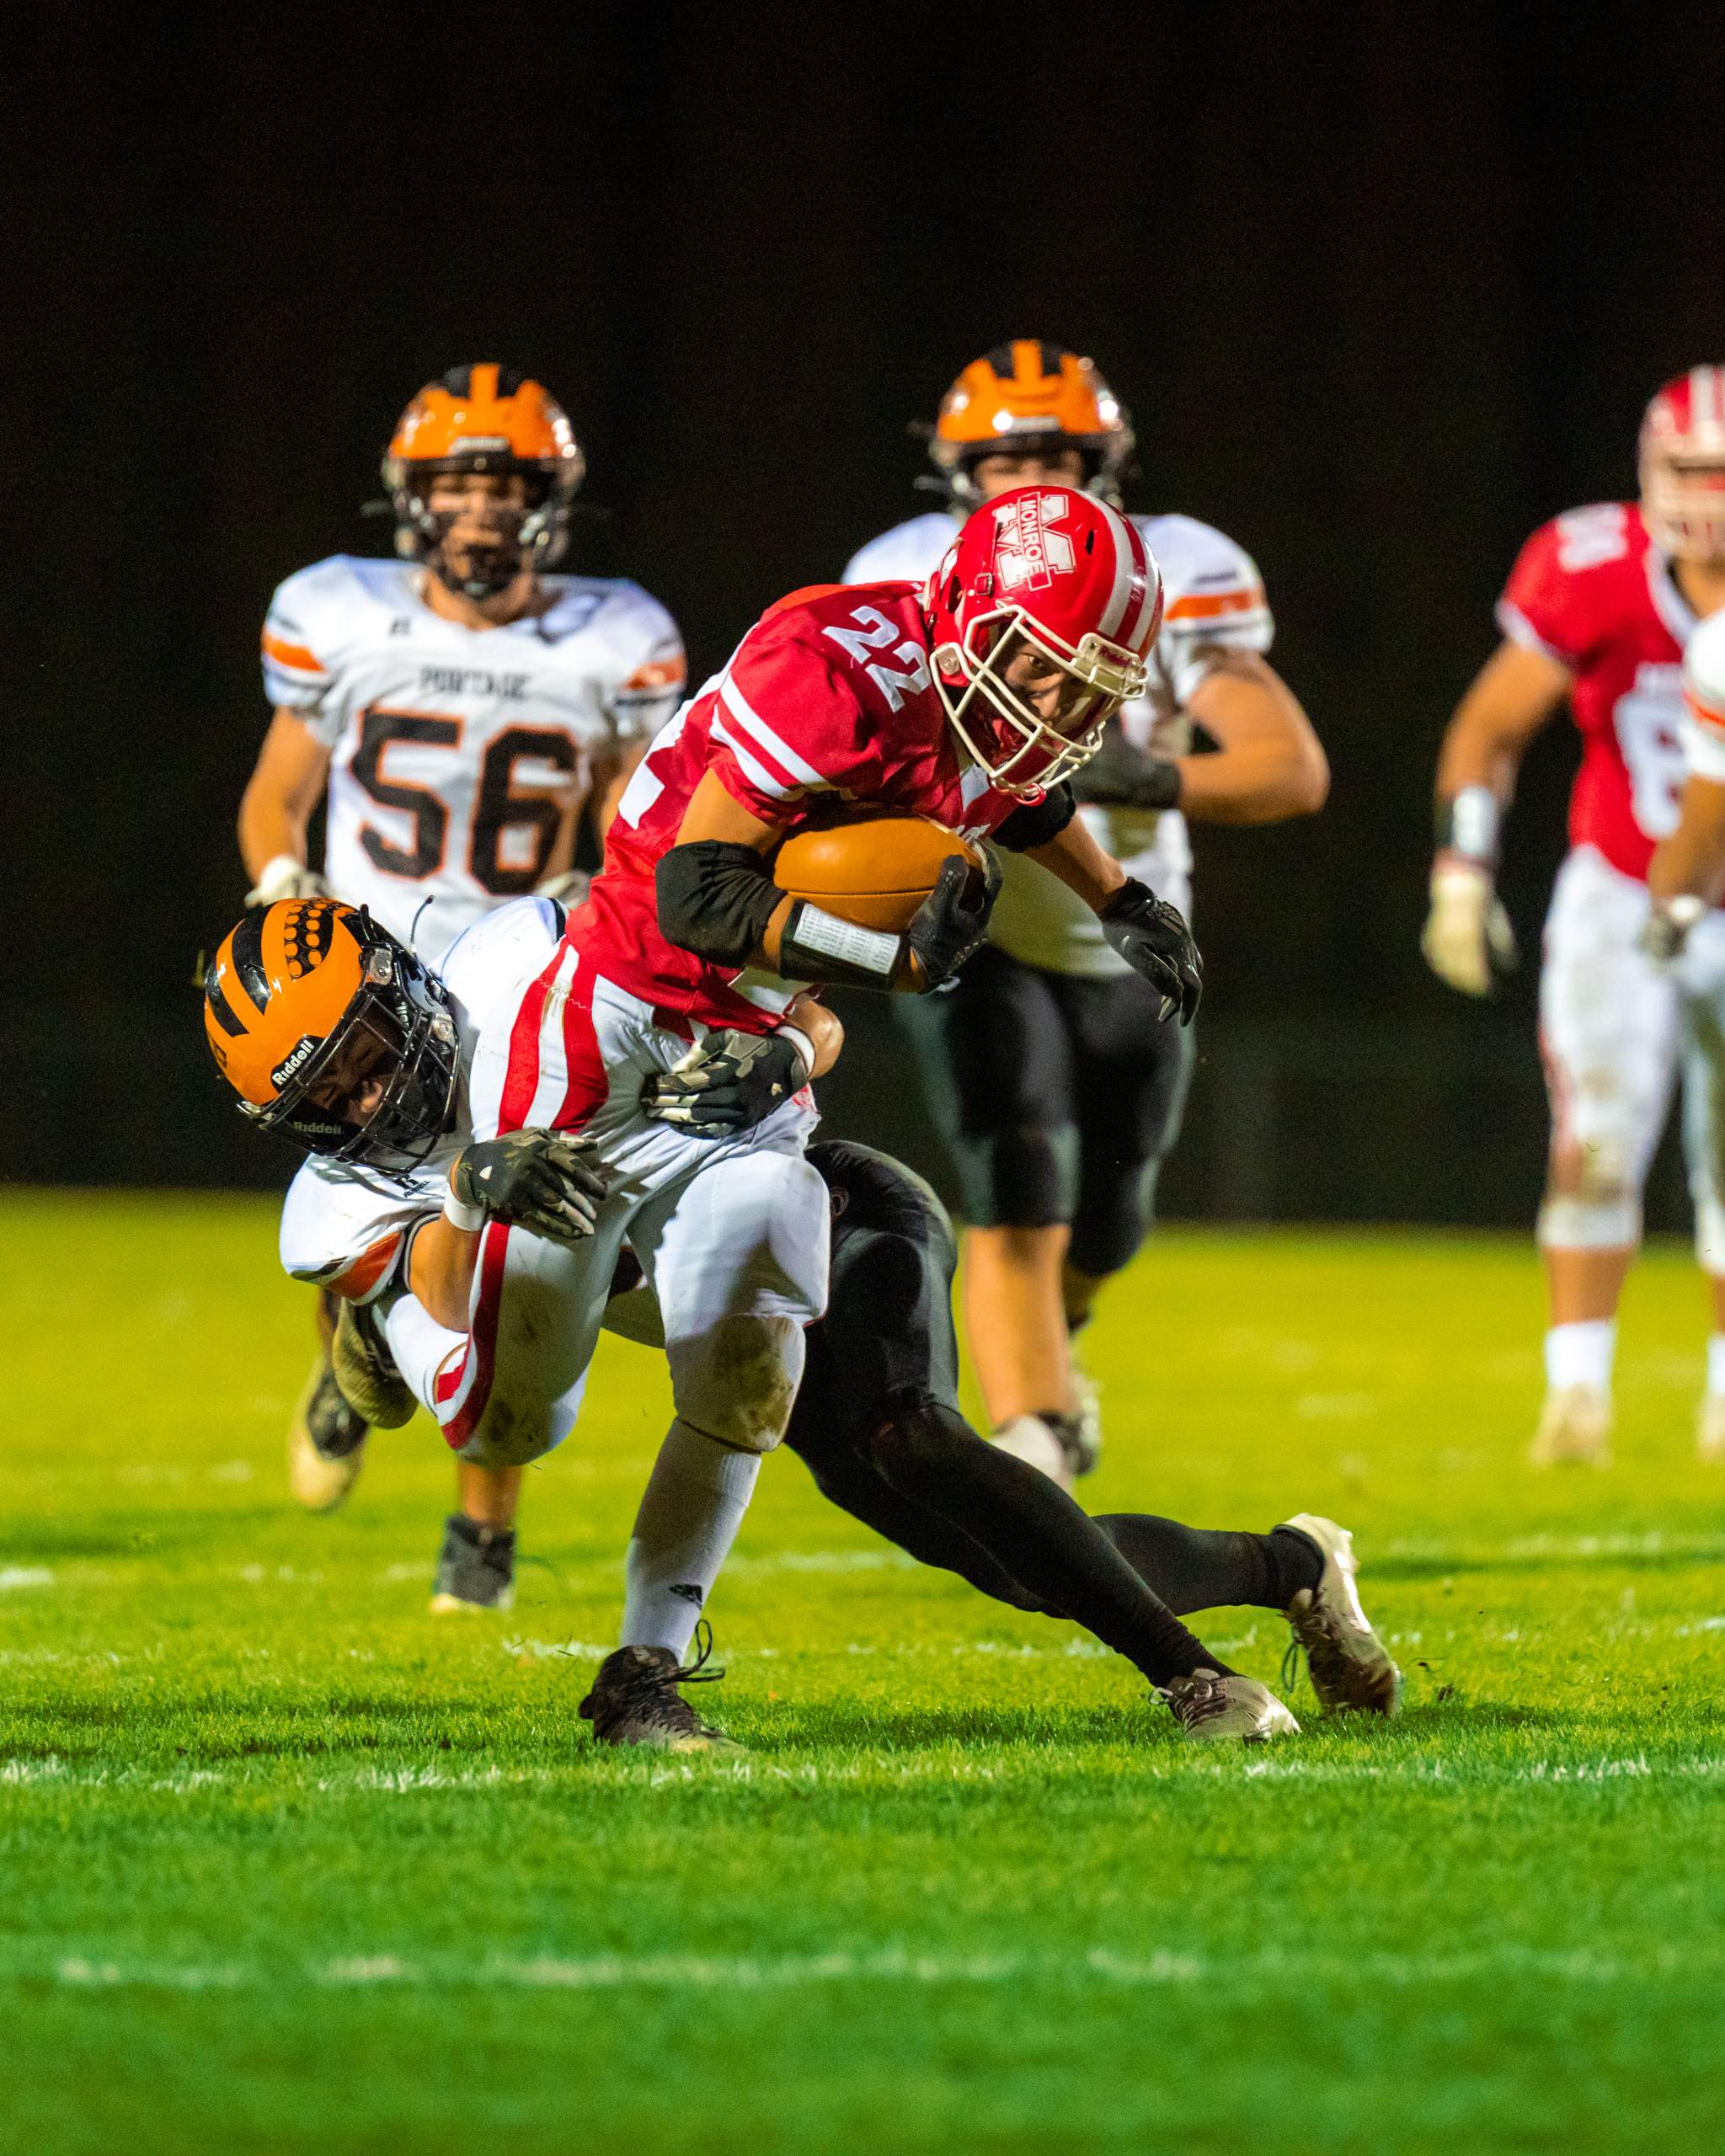 Monroe vs. Portage Round 1 of 2022 Playoffs, October 21st, 2022, photography by Ross Harried for Second Crop Sports